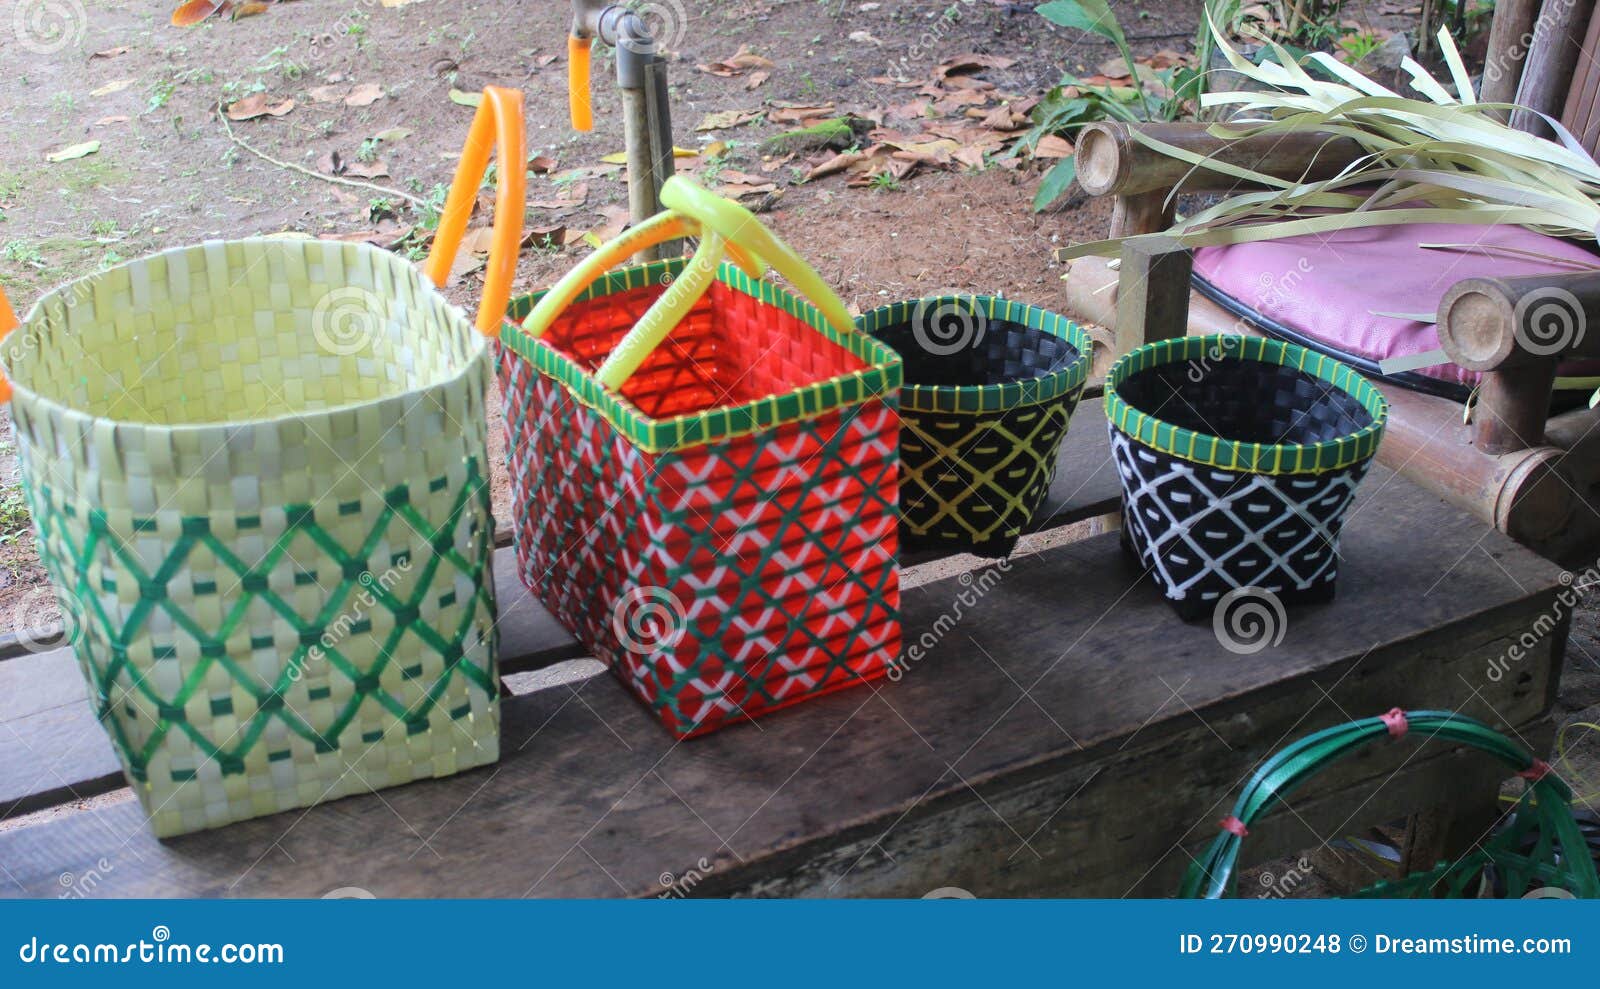 handicraft, basket made manually from plastic rope waste leather.